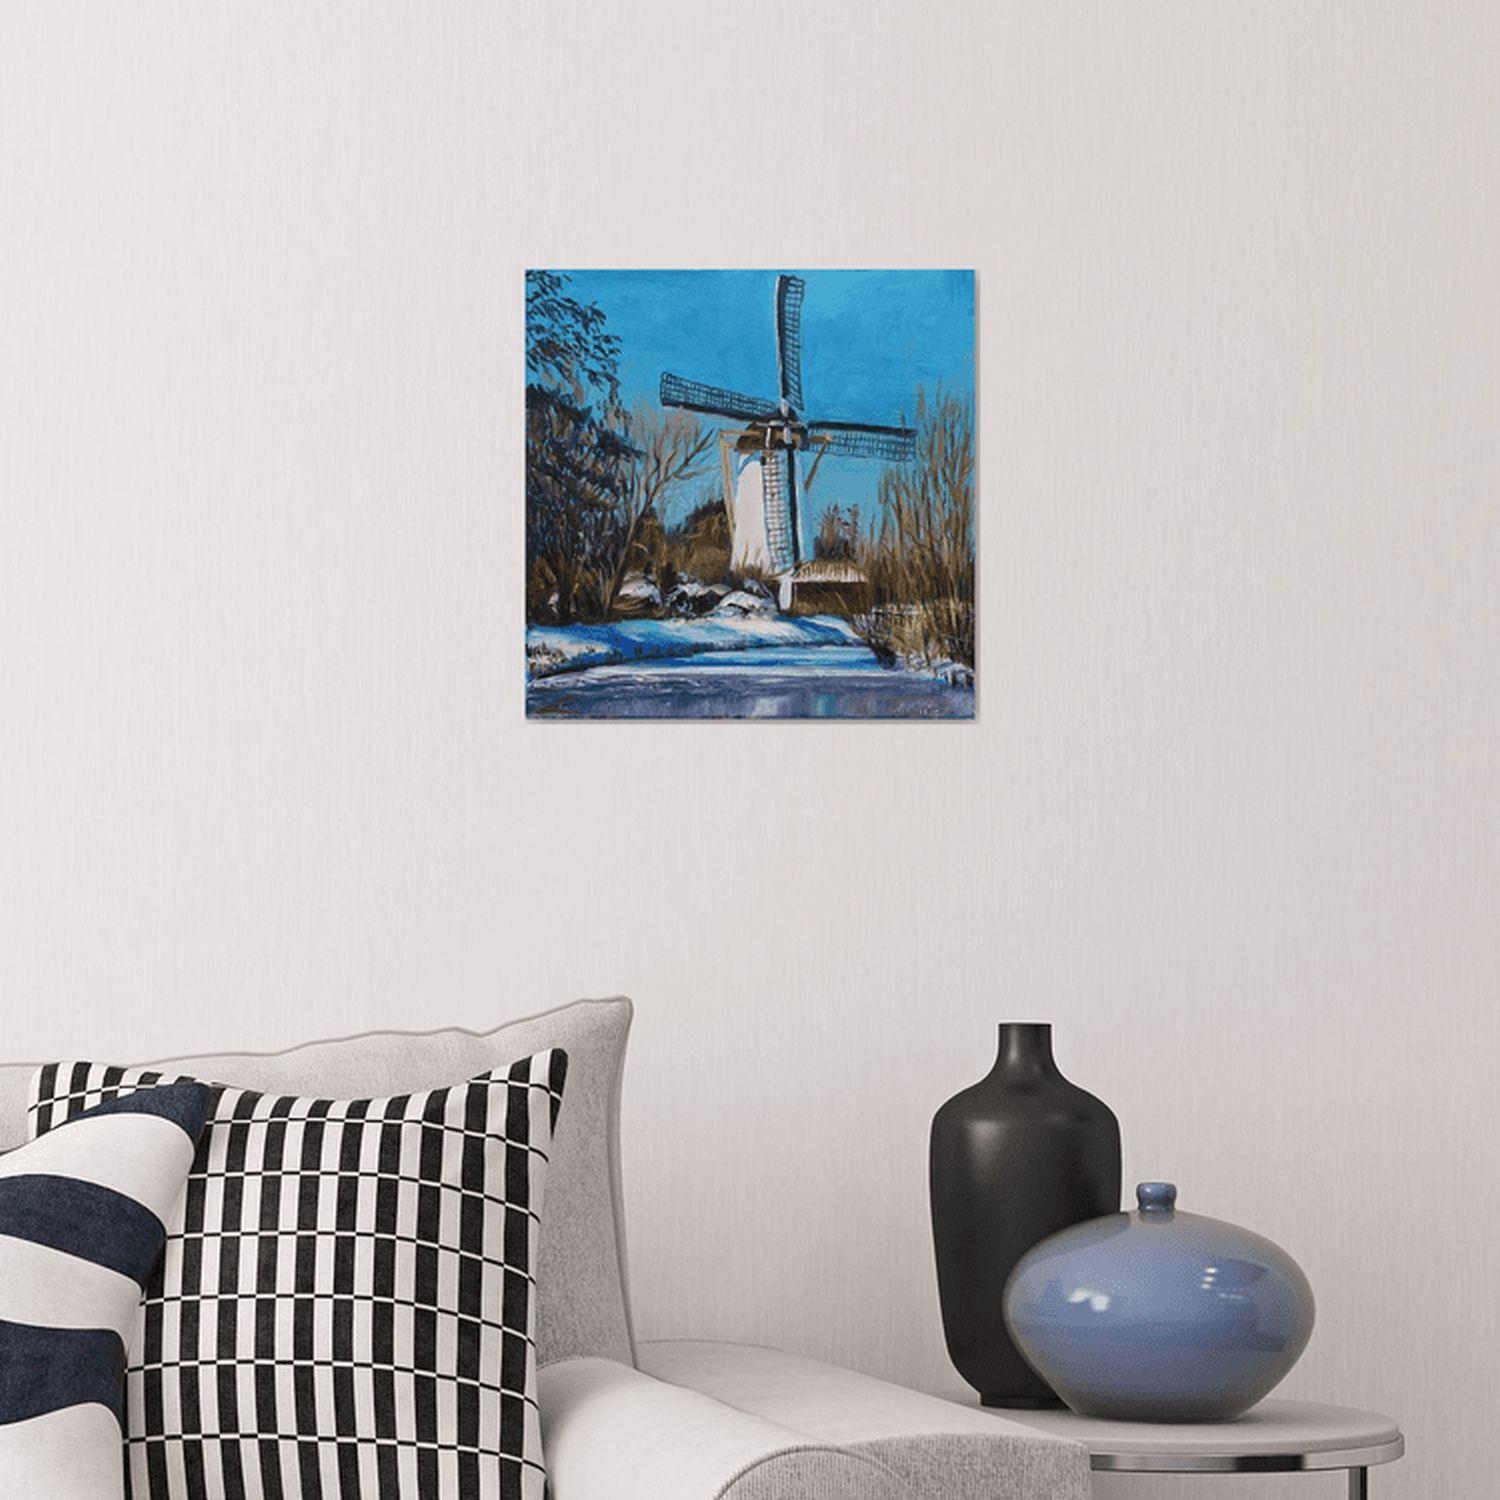 Winter Holland landscape with a small windmill at the iced channel. Alla prima painting with small changes when dry. :: Painting :: Impressionist :: This piece comes with an official certificate of authenticity signed by the artist :: Ready to Hang: